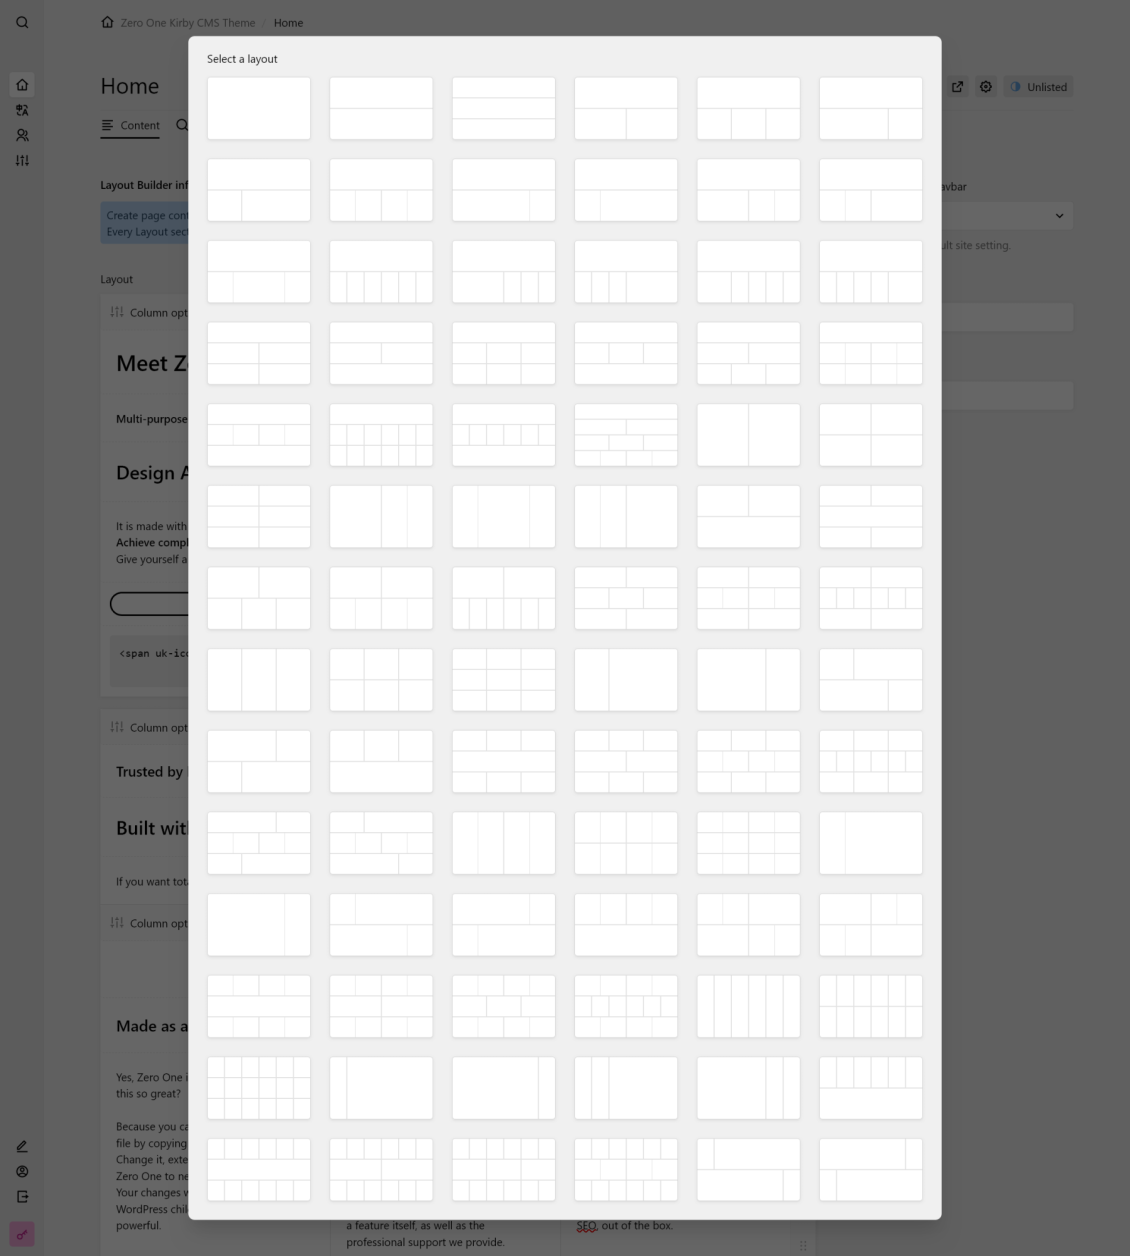 Layout Builder layouts panel